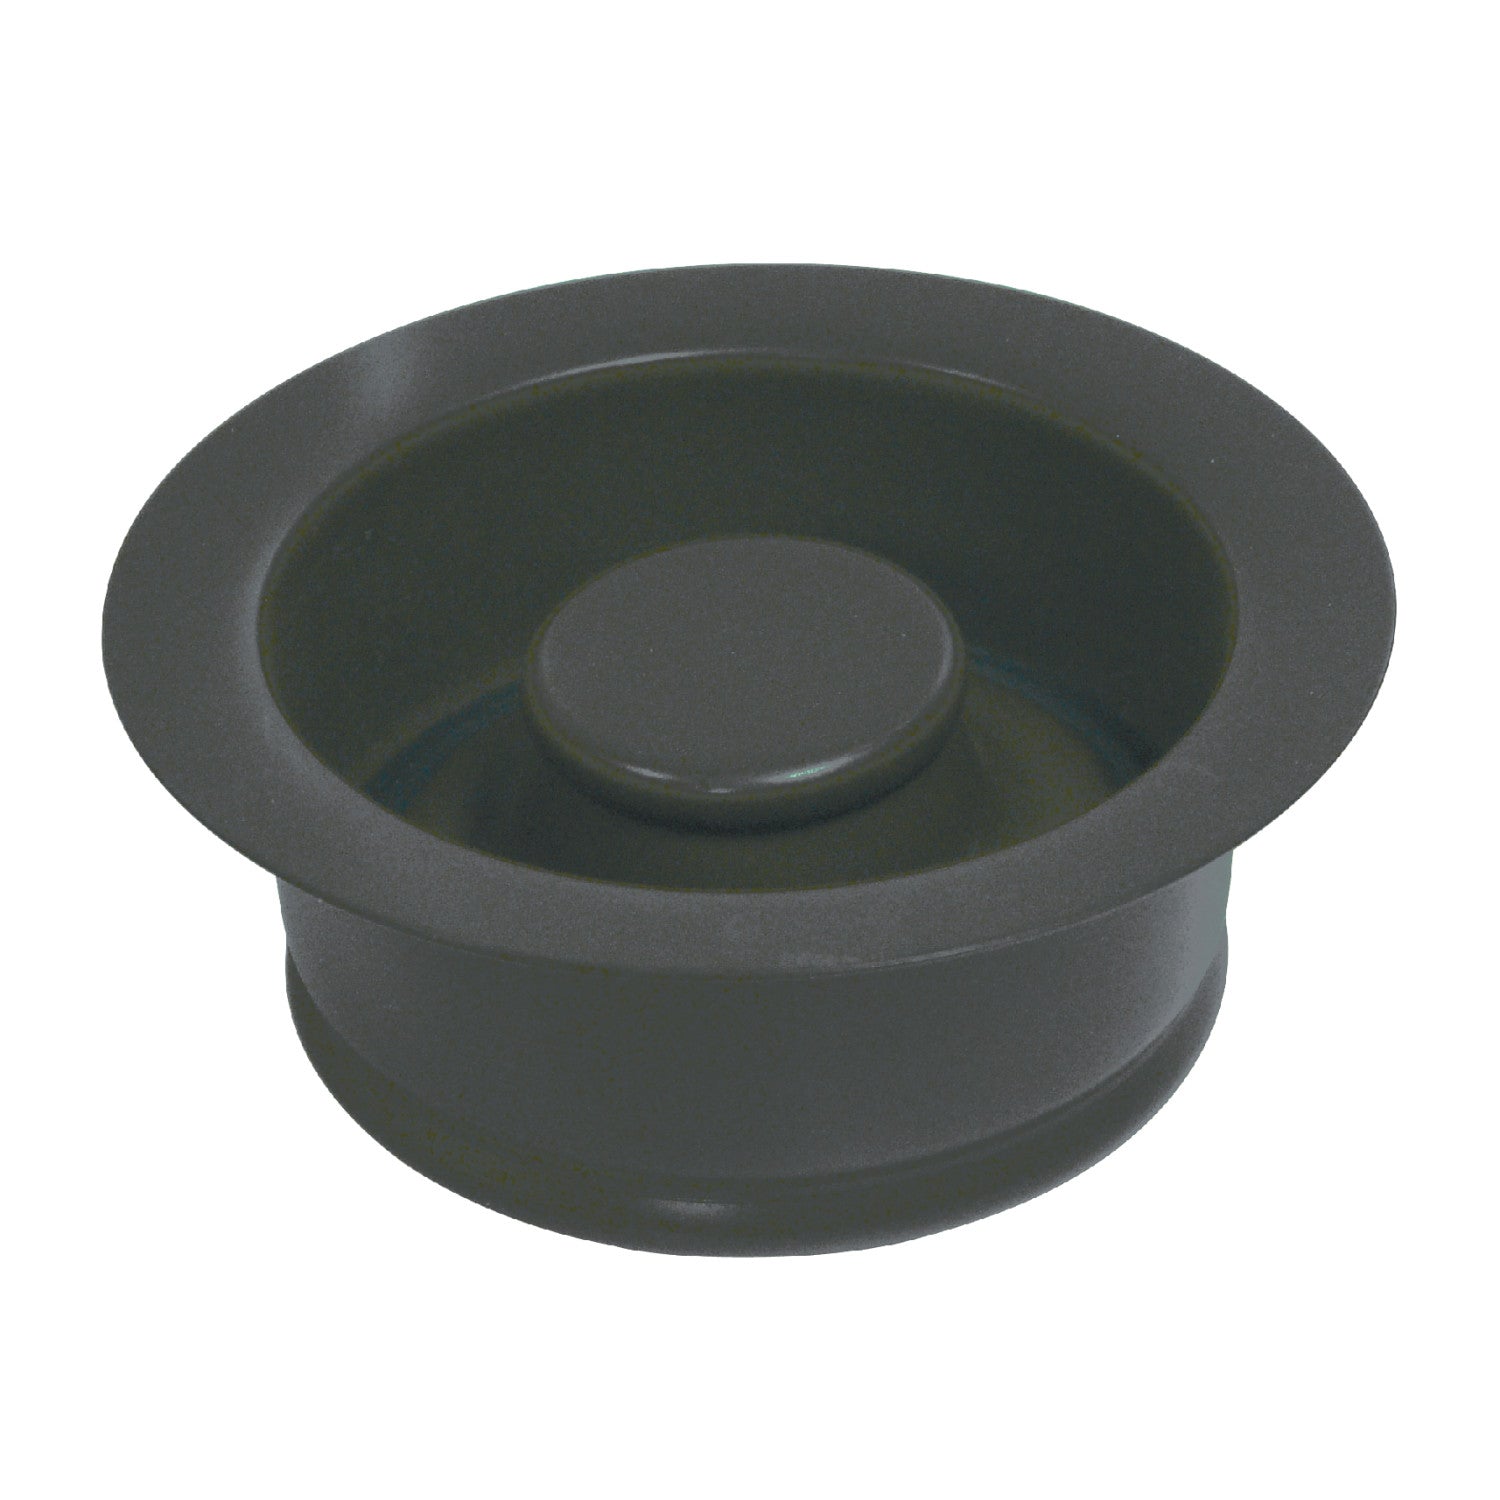 Dropship Garbage Disposal Flange And Stopper, Durable Gunmetal Black/Gray  Stainless Steel Kitchen Sink Flange With Nano Surface, Fits 3-1/2 Inch  Standard Sink Drain Hole to Sell Online at a Lower Price